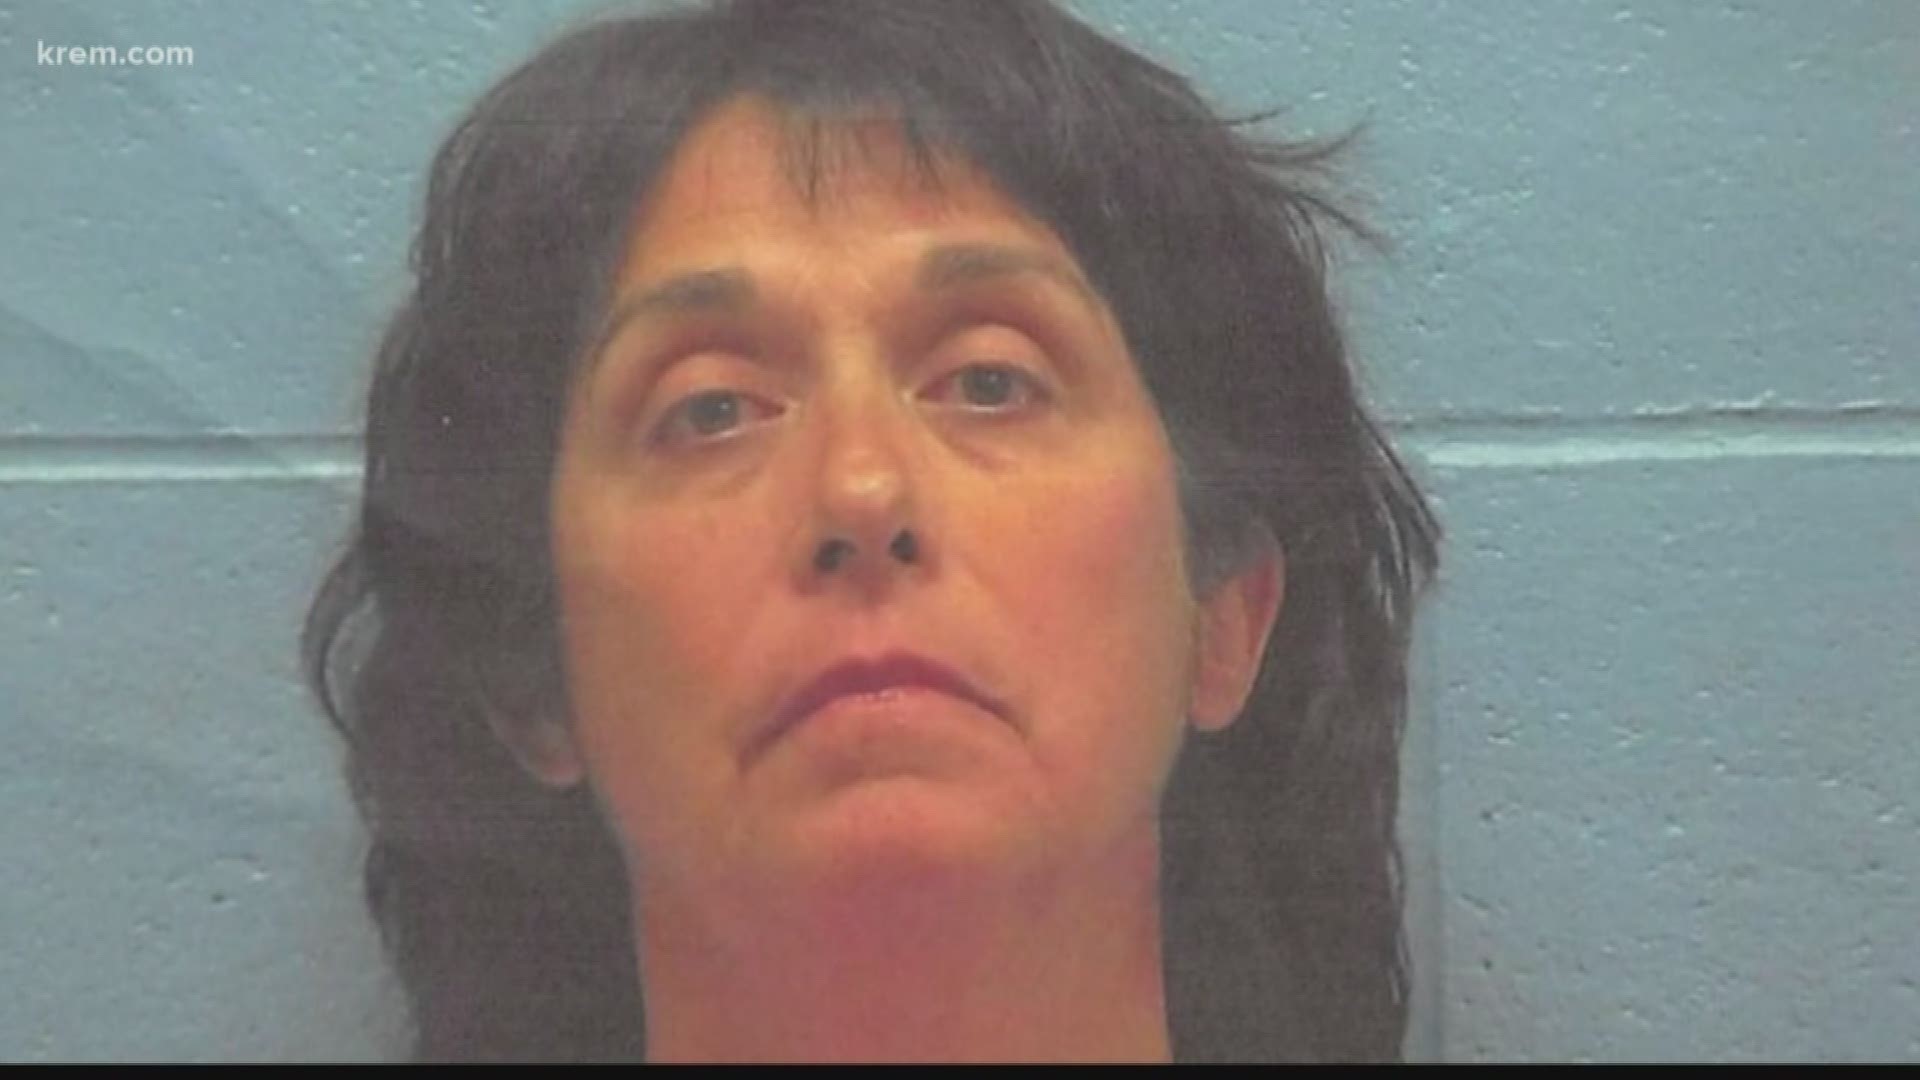 Just last week, authorities arrested Judith Carpenter at her home in Coeur d'Alene. Investigators say she is responsible for killing a 78-year-old woman in her Bonner County home two years ago. The same day of the killing, Carpenter was arrested following a road-rage incident in Montana.